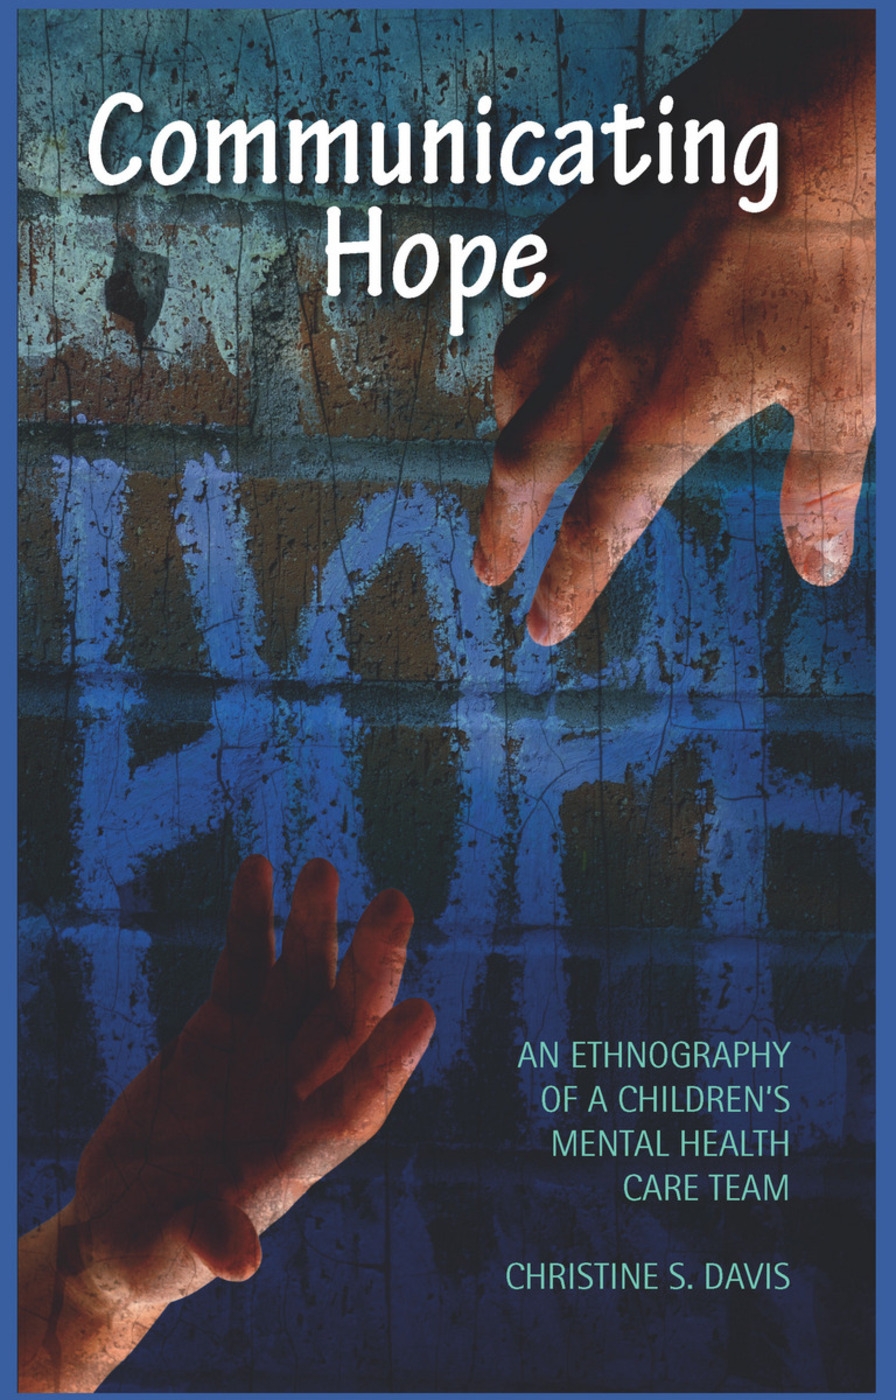 Communicating Hope: An Ethnography of a Children’s Mental Health Care Team